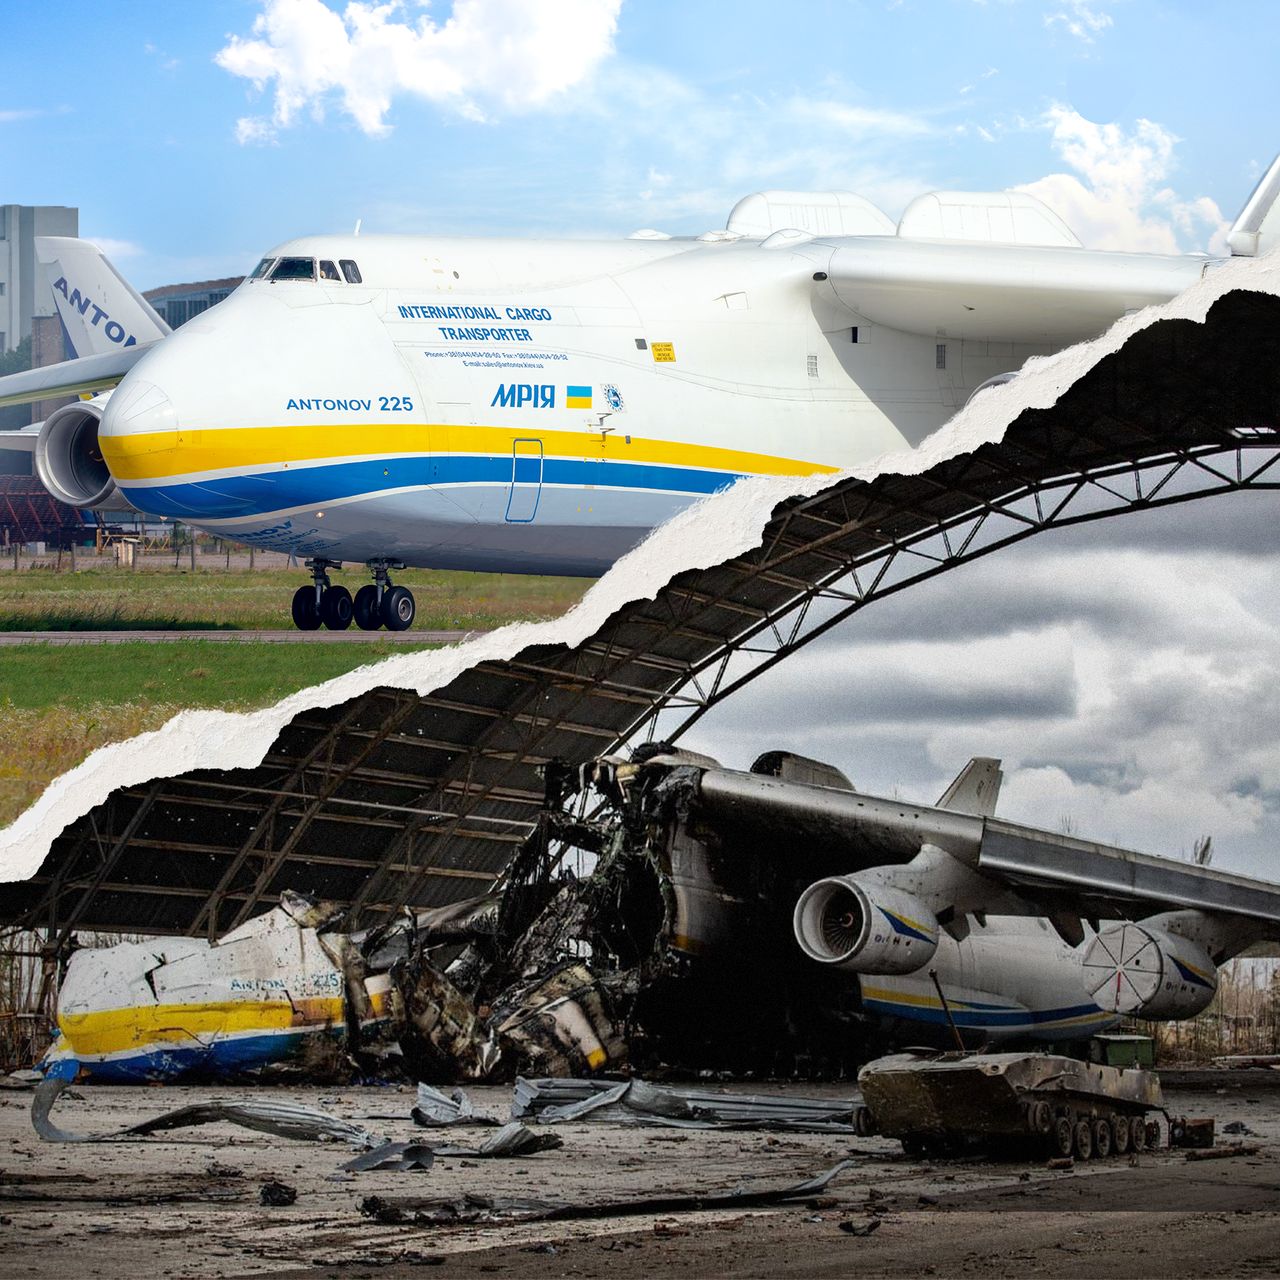 The AN-225 "Mriia" cargo plane. Since its construction in the 1980s,the one-of-a-kind cargo plane designed to transport objects for the space industry has set more than 240 world records for speed, altitude, and load capacity. It was destroyed and burned during the March 27 Russian attack on Hostomel.